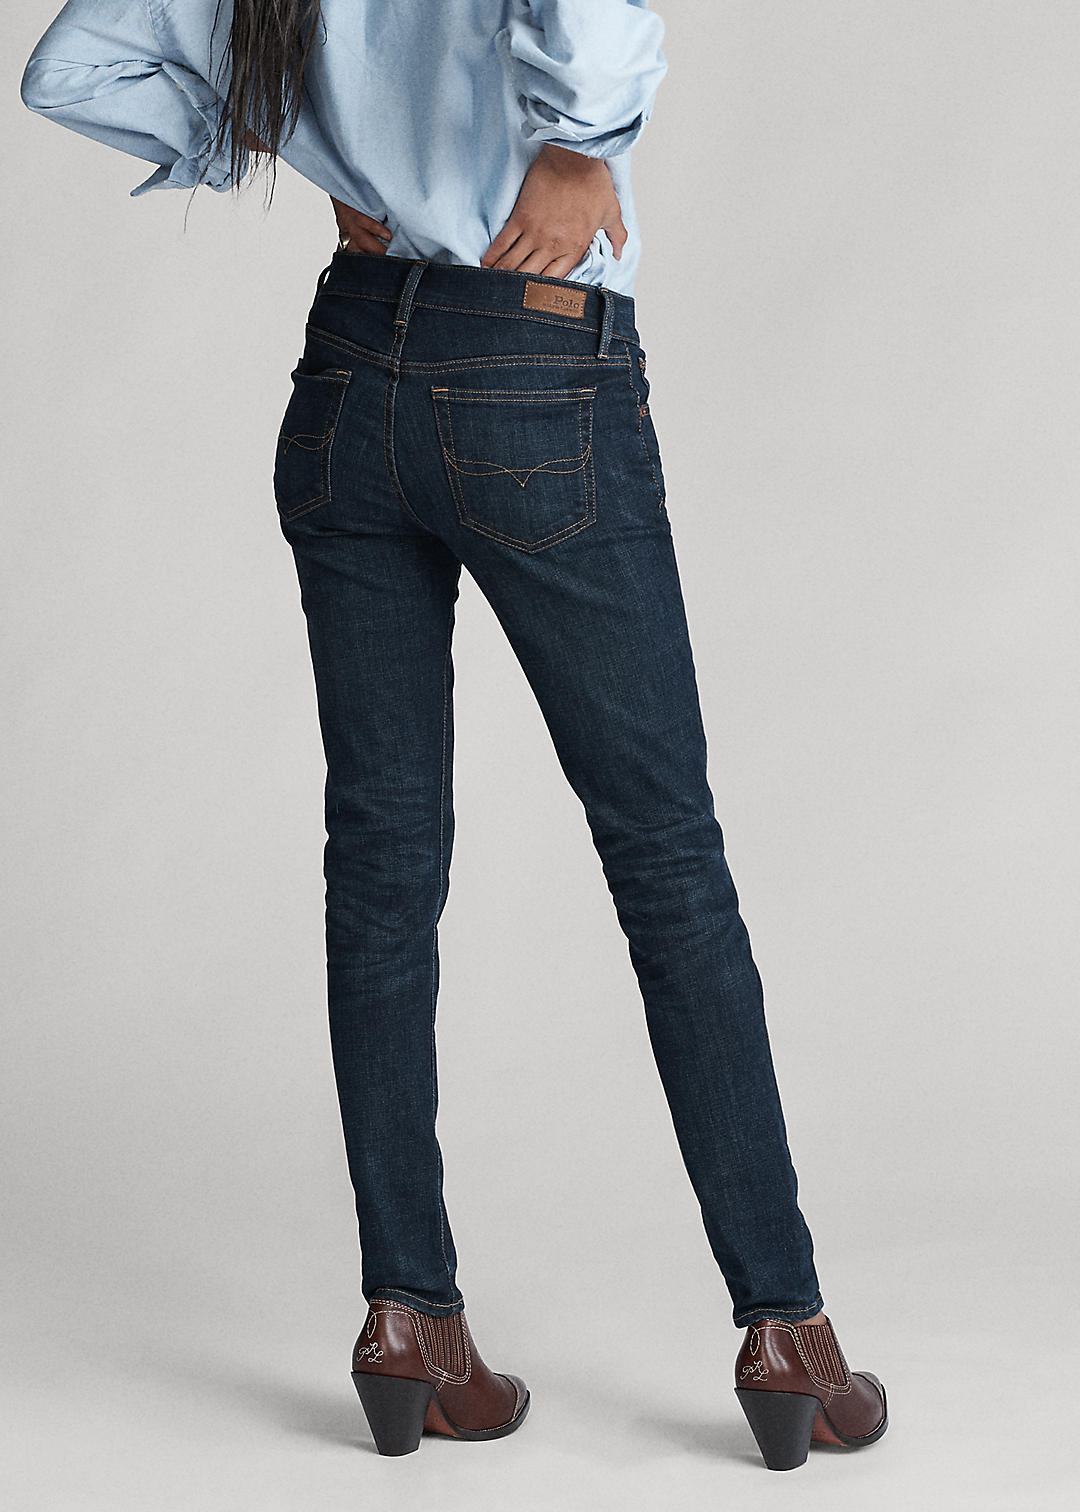 Polo Ralph Lauren Tompkins Skinny Jean with Polo 5